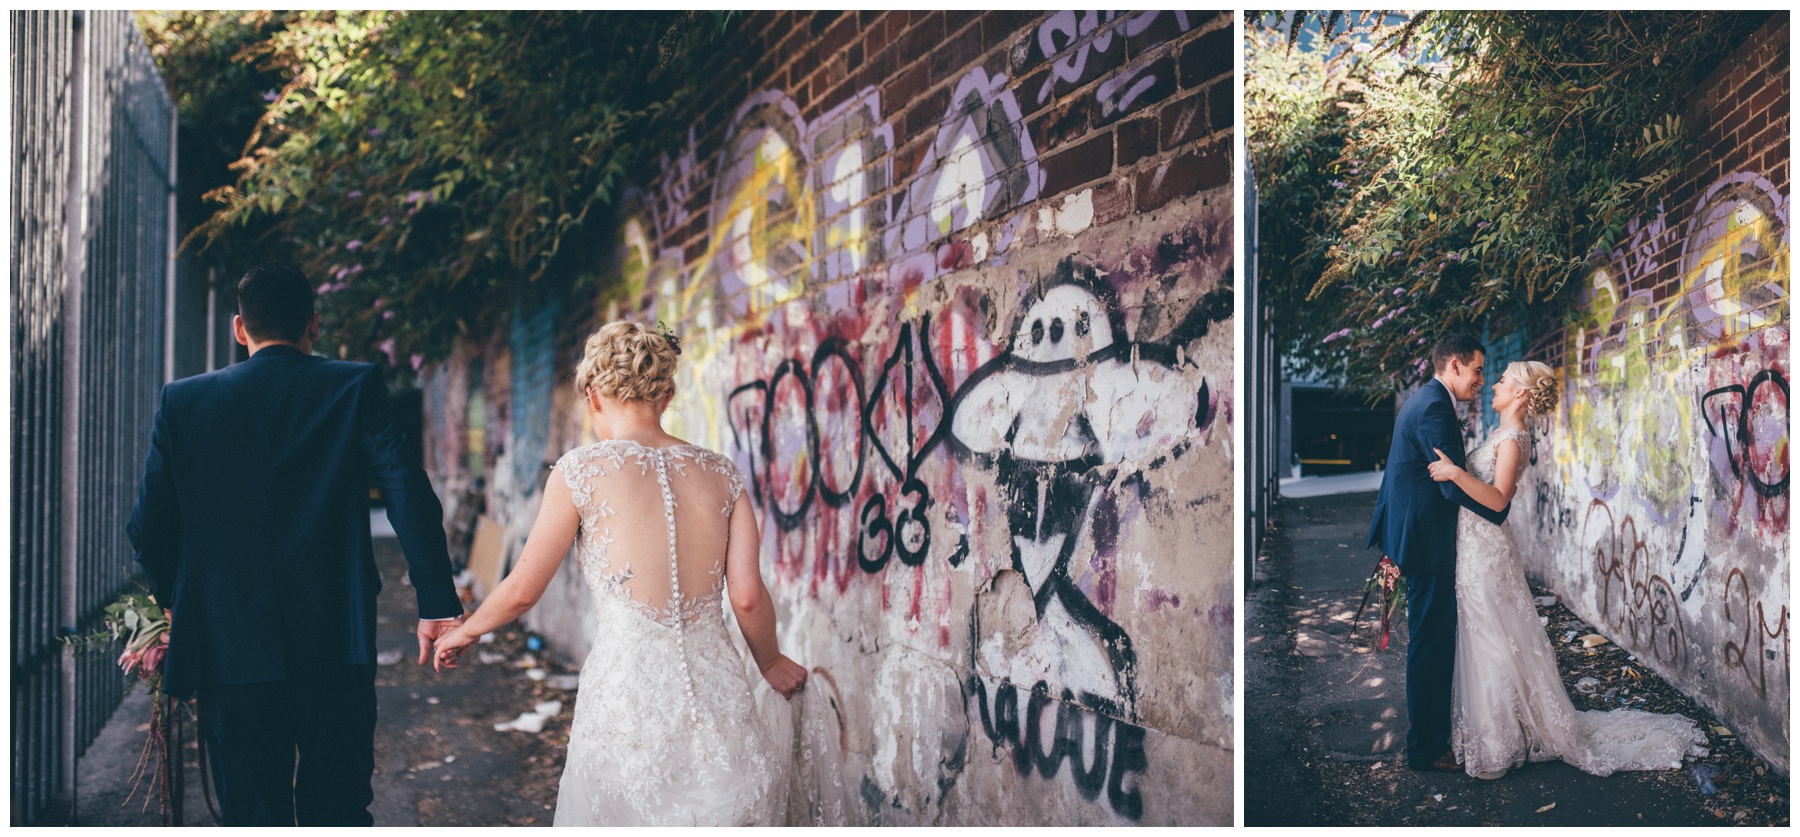 Graffiti covered car park and streets in Sheffield city centre wedding make a great back-drop for bride and groom.